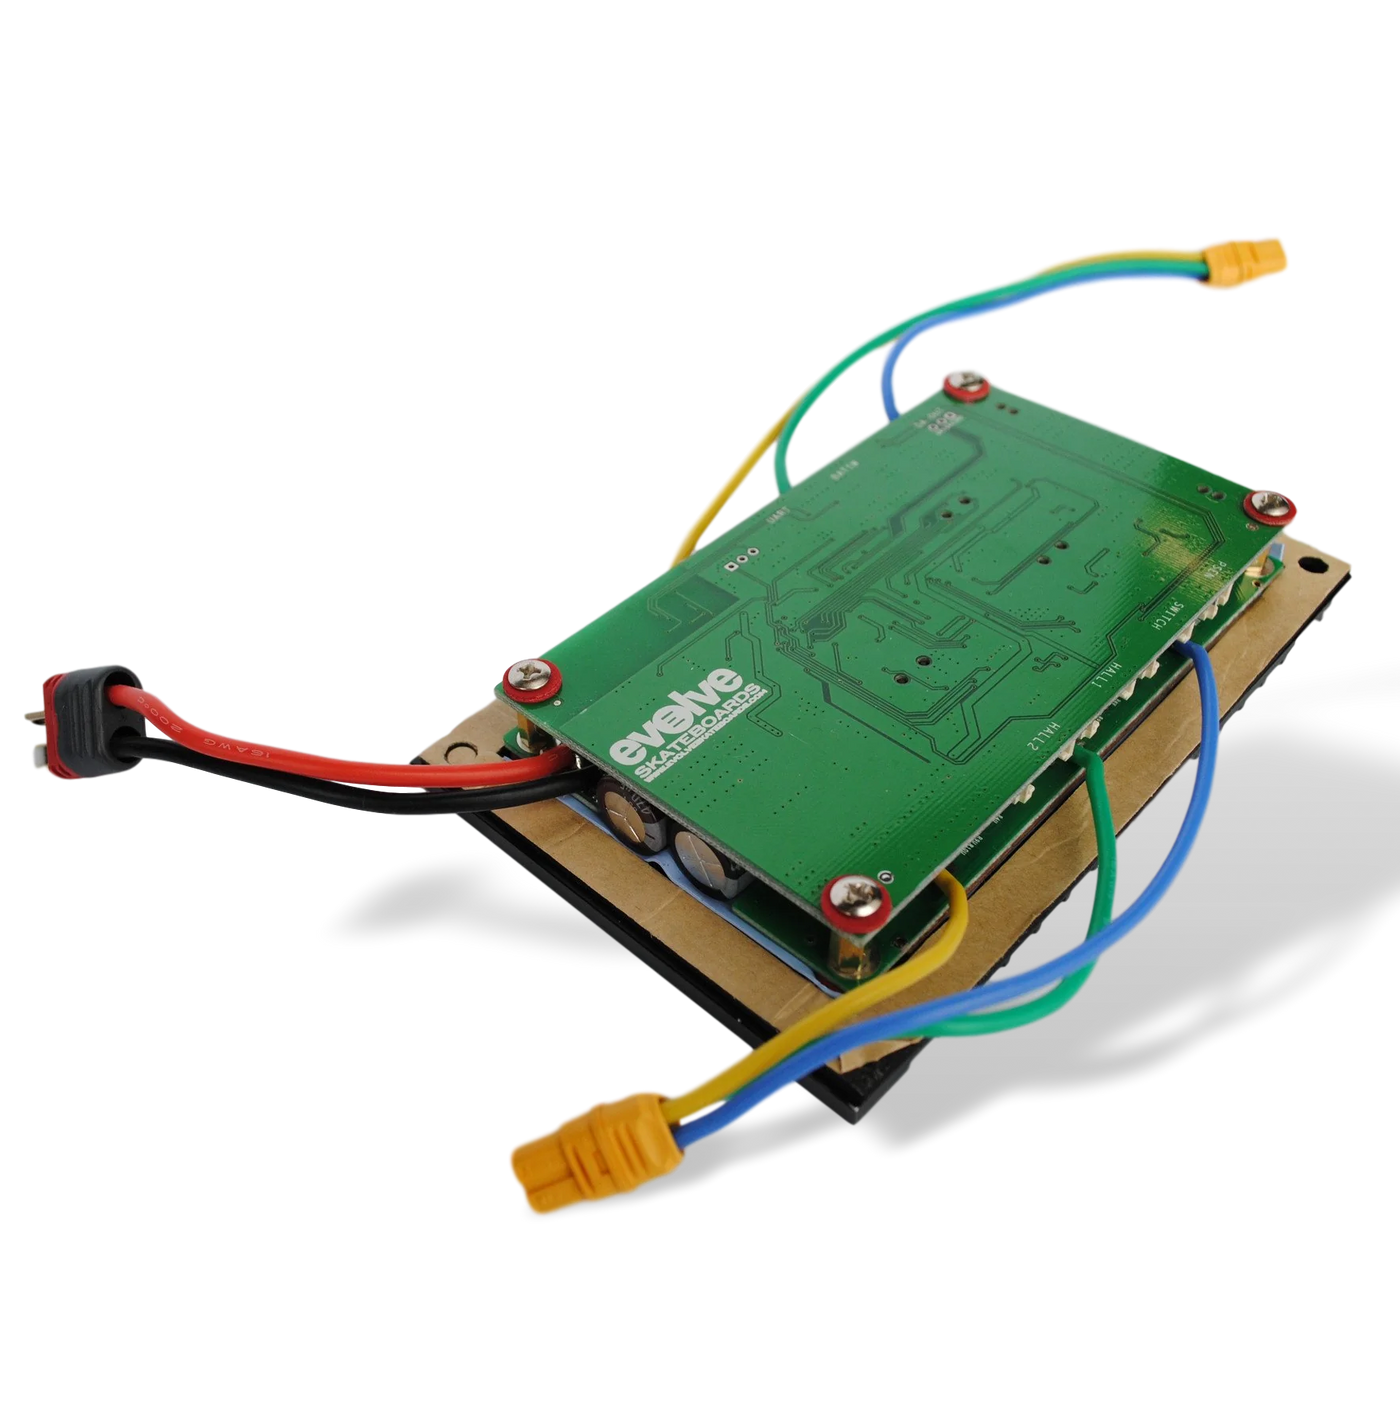 Evolve Motor Controllers